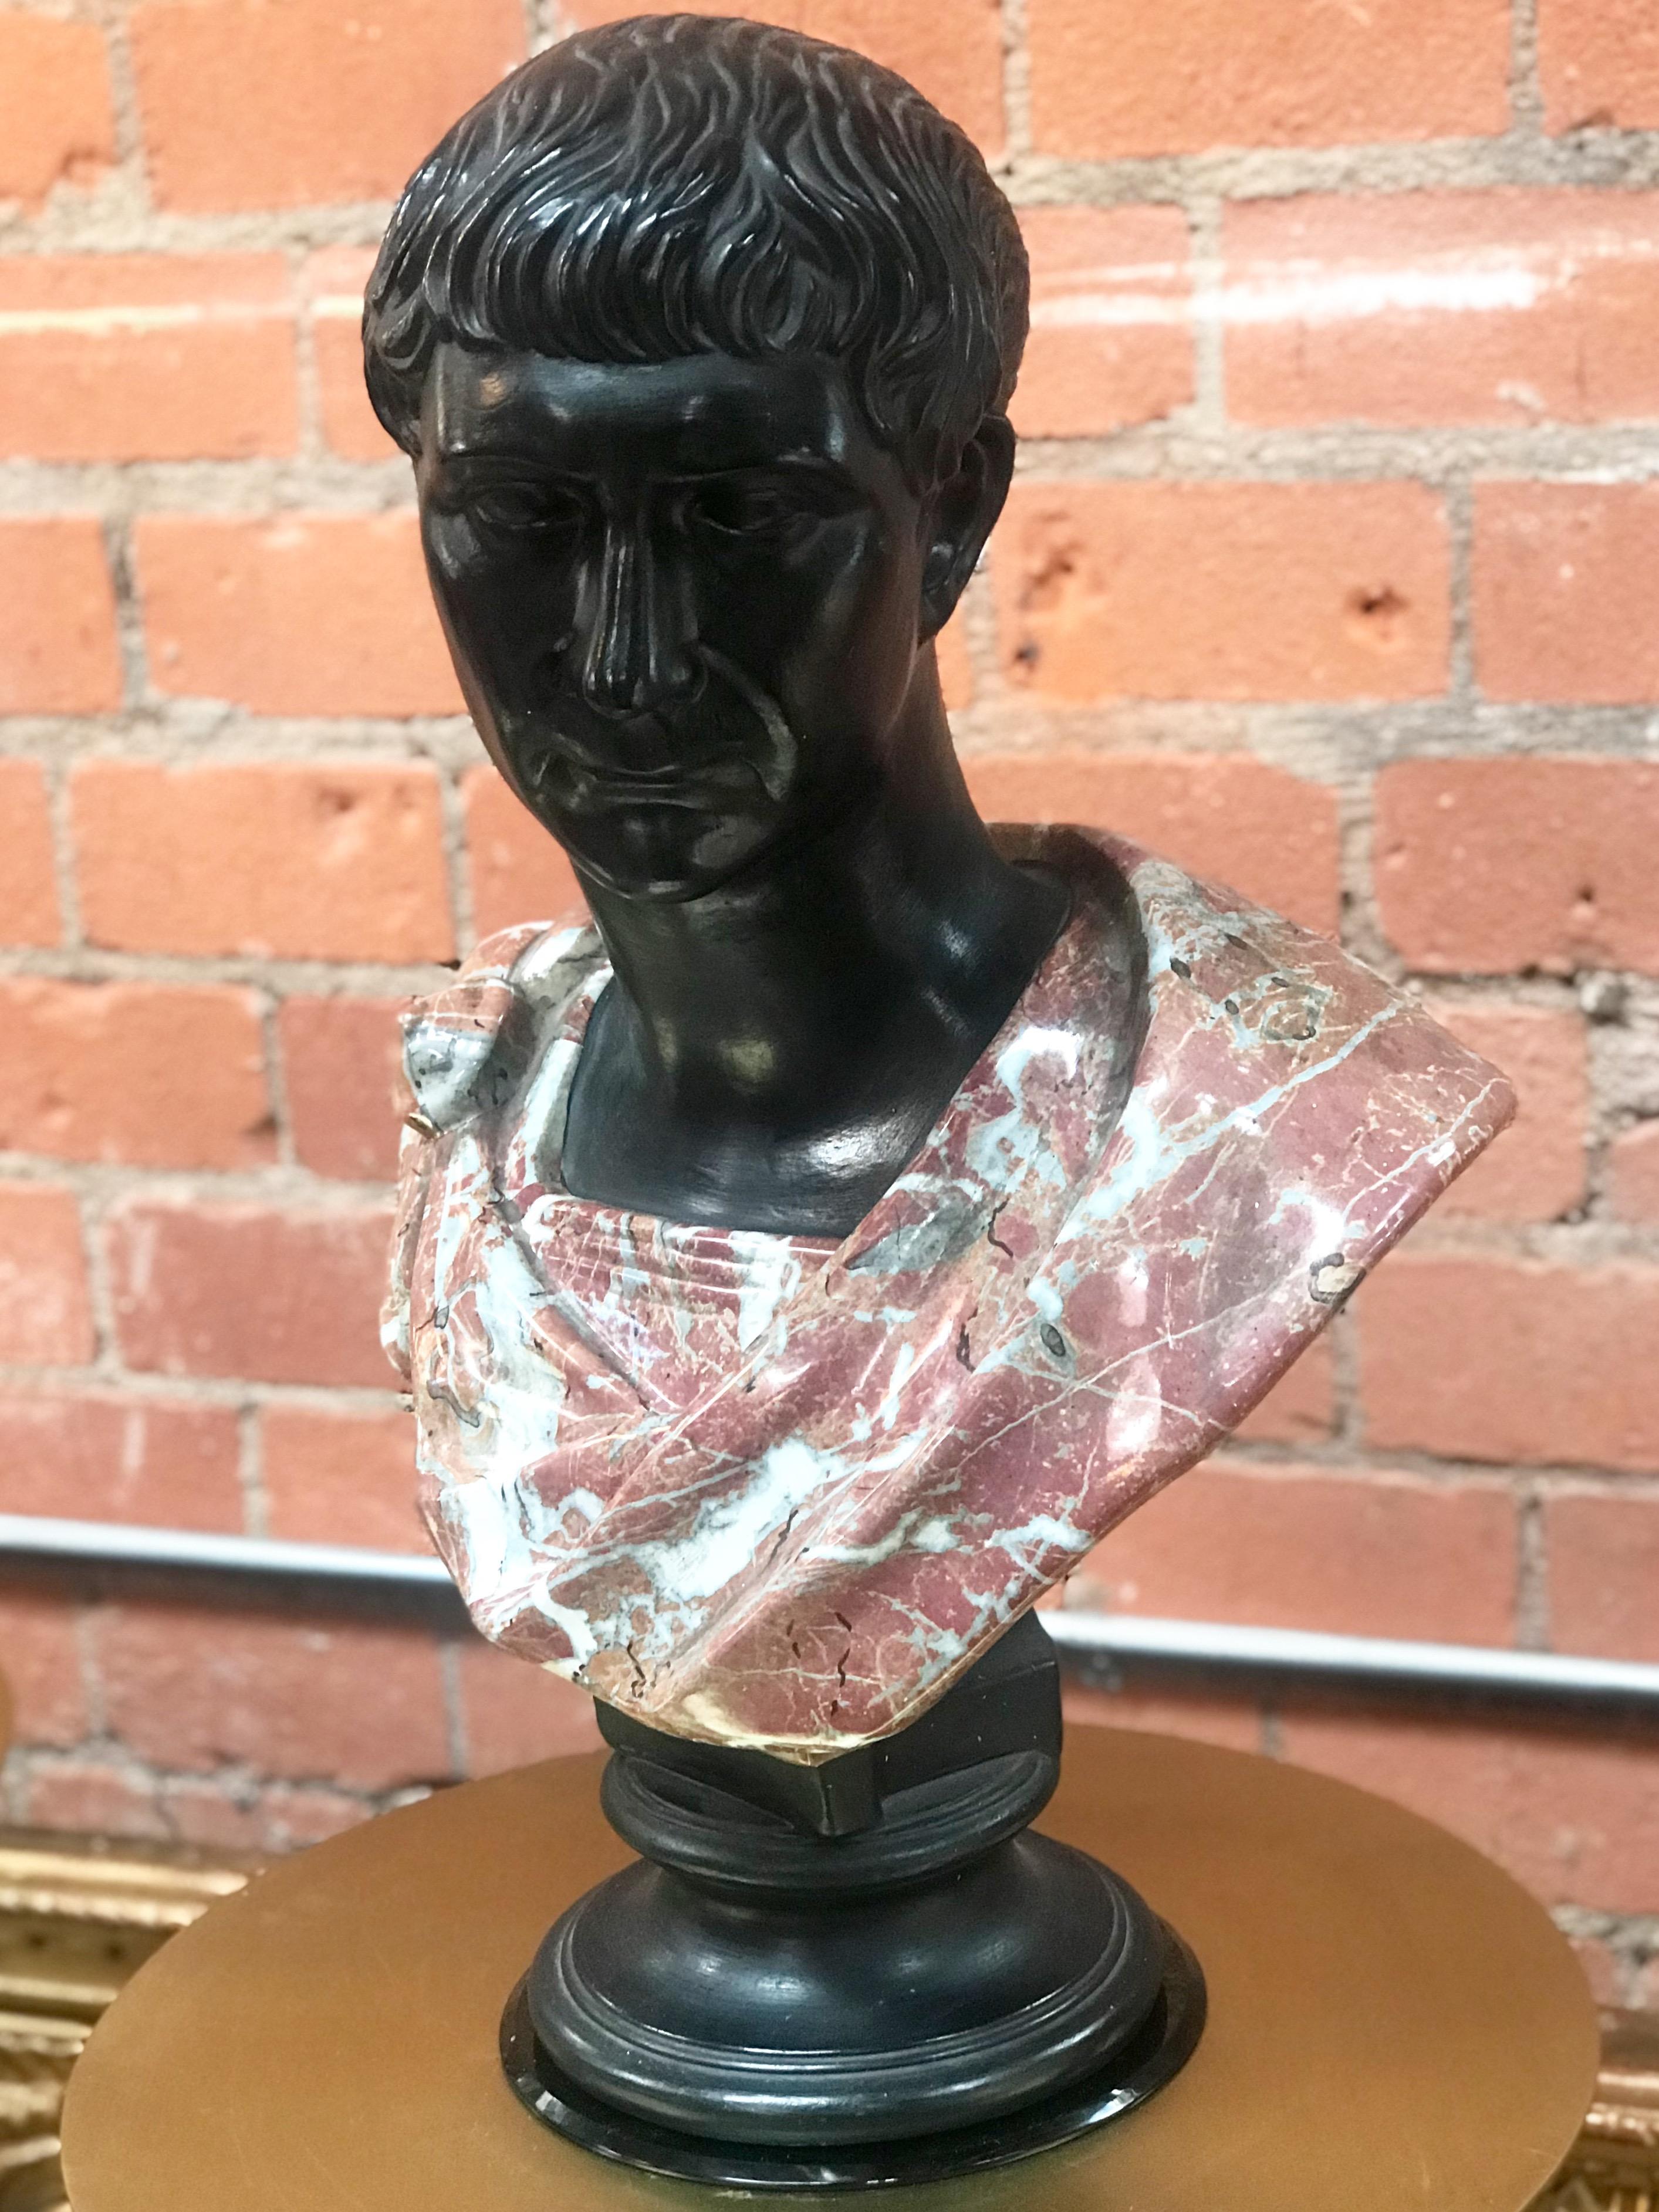 Late 1800s glazed terracotta bust and marble. Nice original patina.
Emperor Augustus Caesar, Roman statesman and military leader, first Emperor of the Roman Empire, captured in an impressive bust: hand-sculpted detail of old well-patina surface,